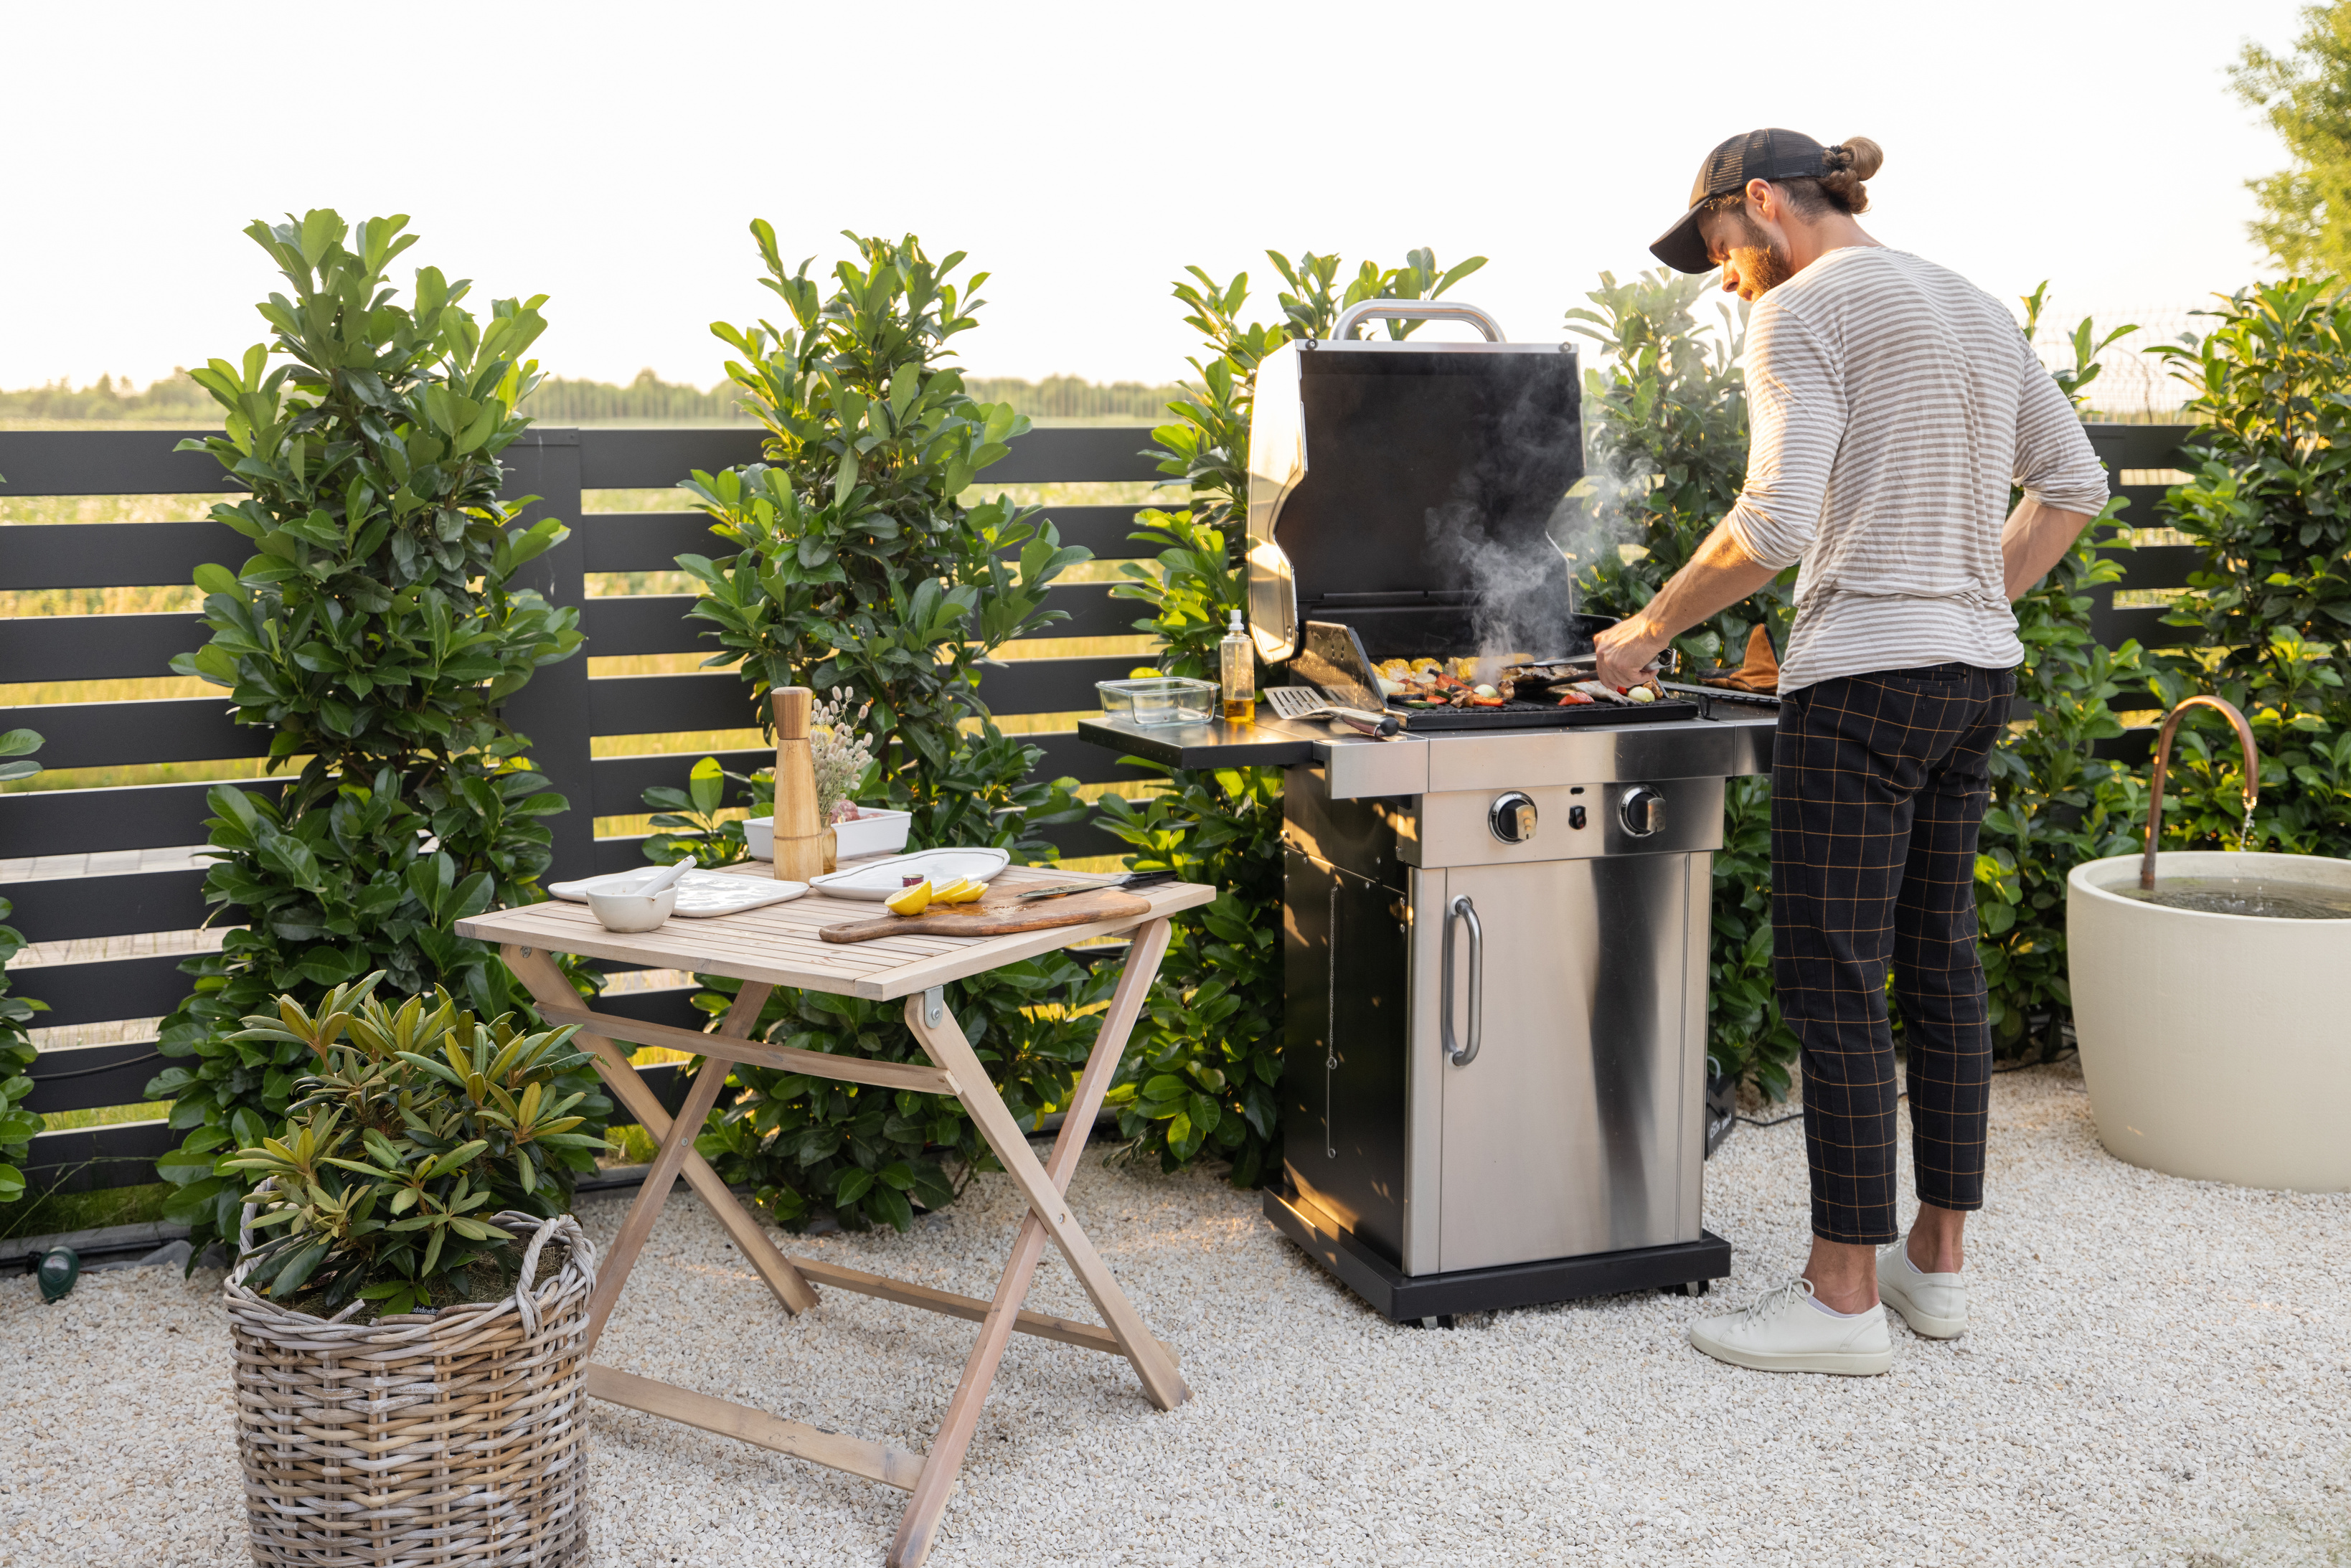 Man Cooking on a Grill Outdoors